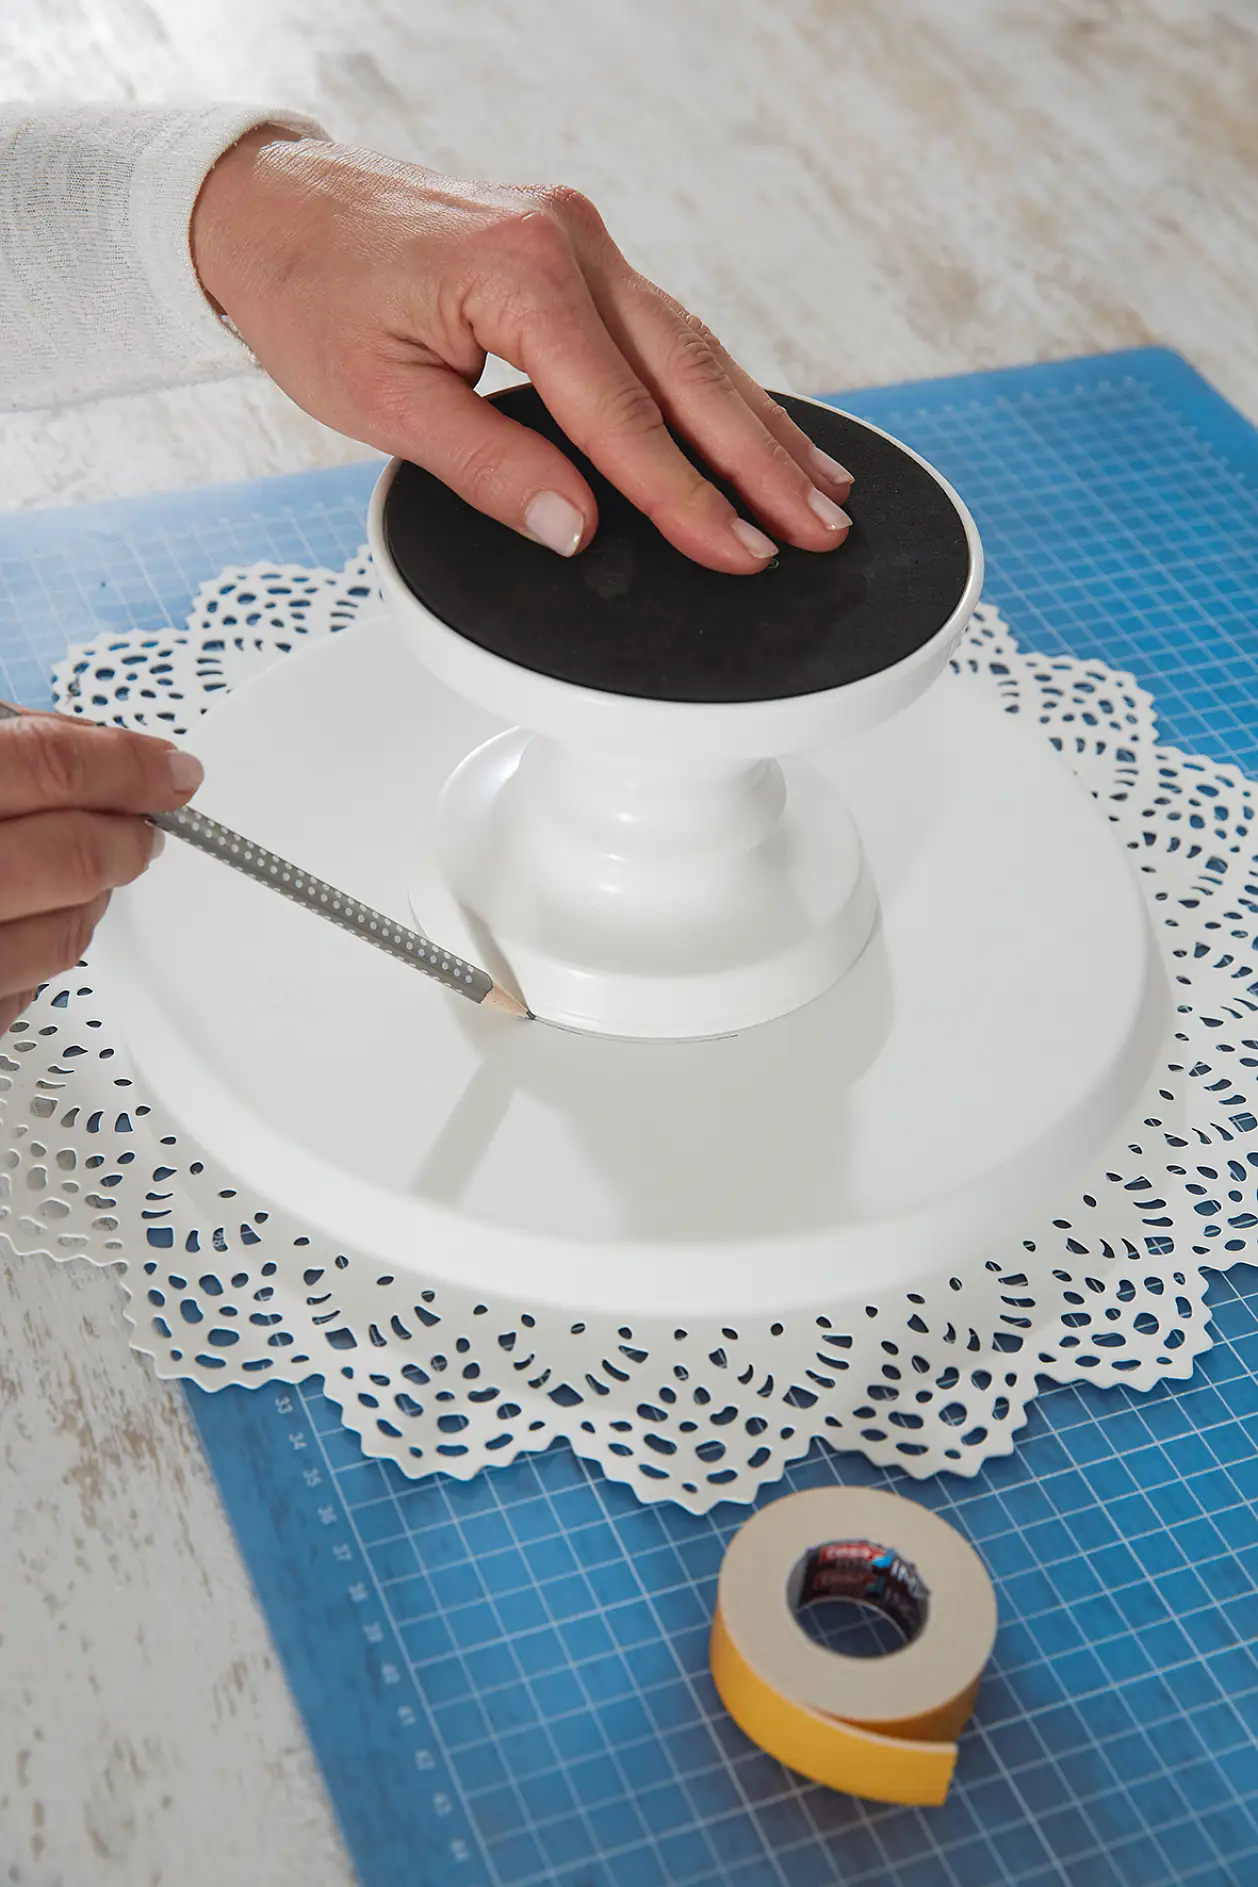 Place the candle holder in a central position on the bottom side of the plate and use a pen to mark the outline.